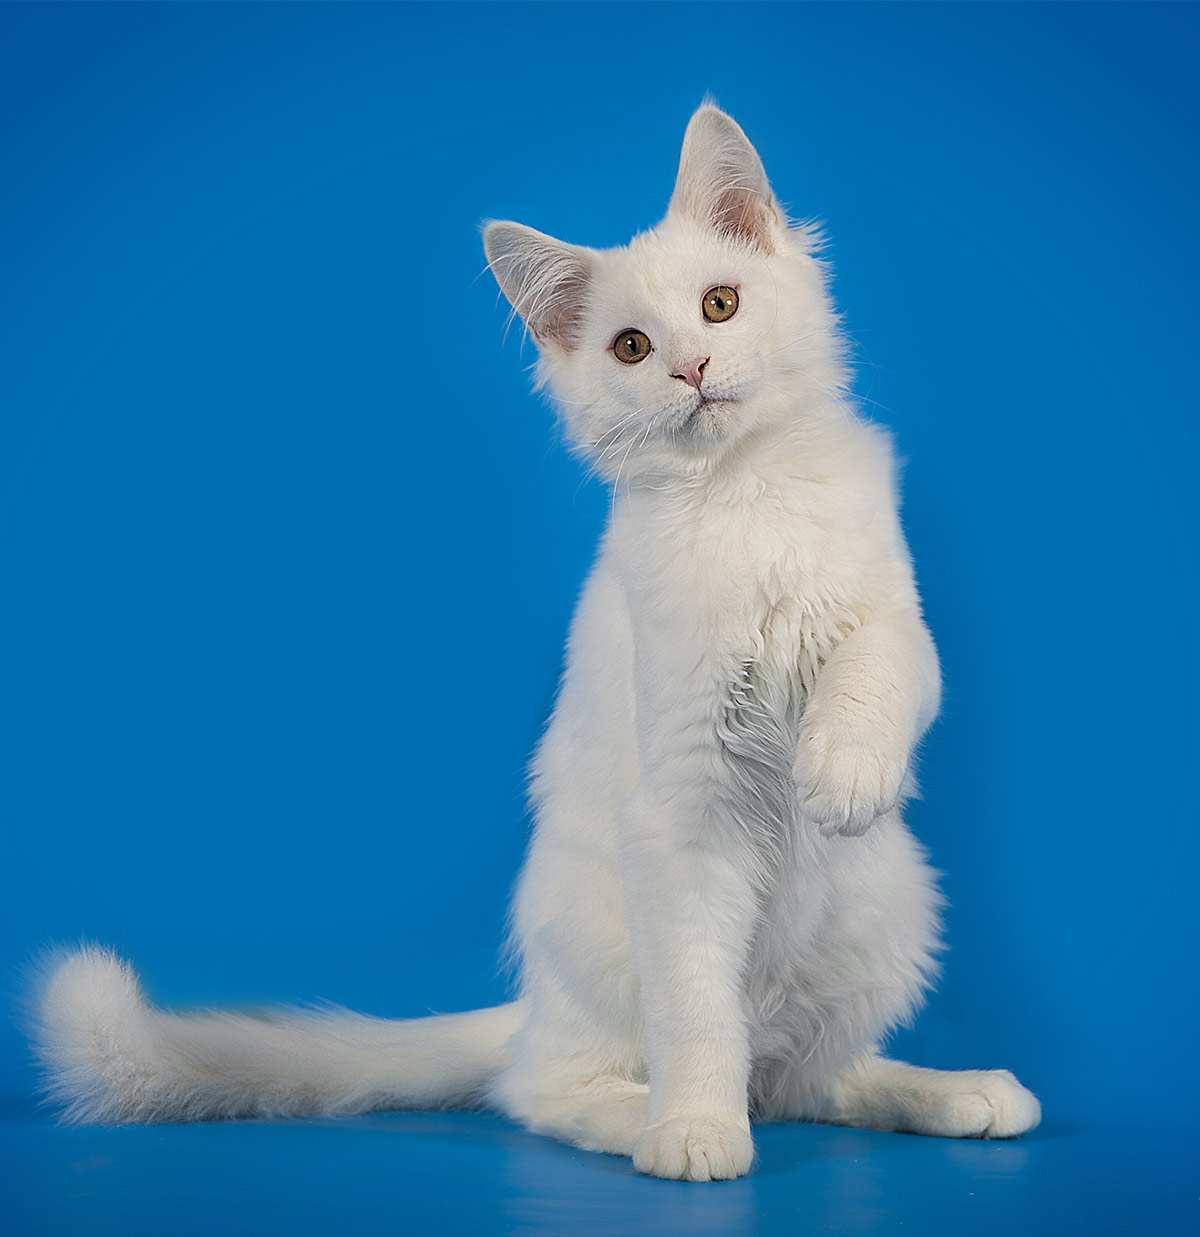 Pictures of white Maine Coon cats